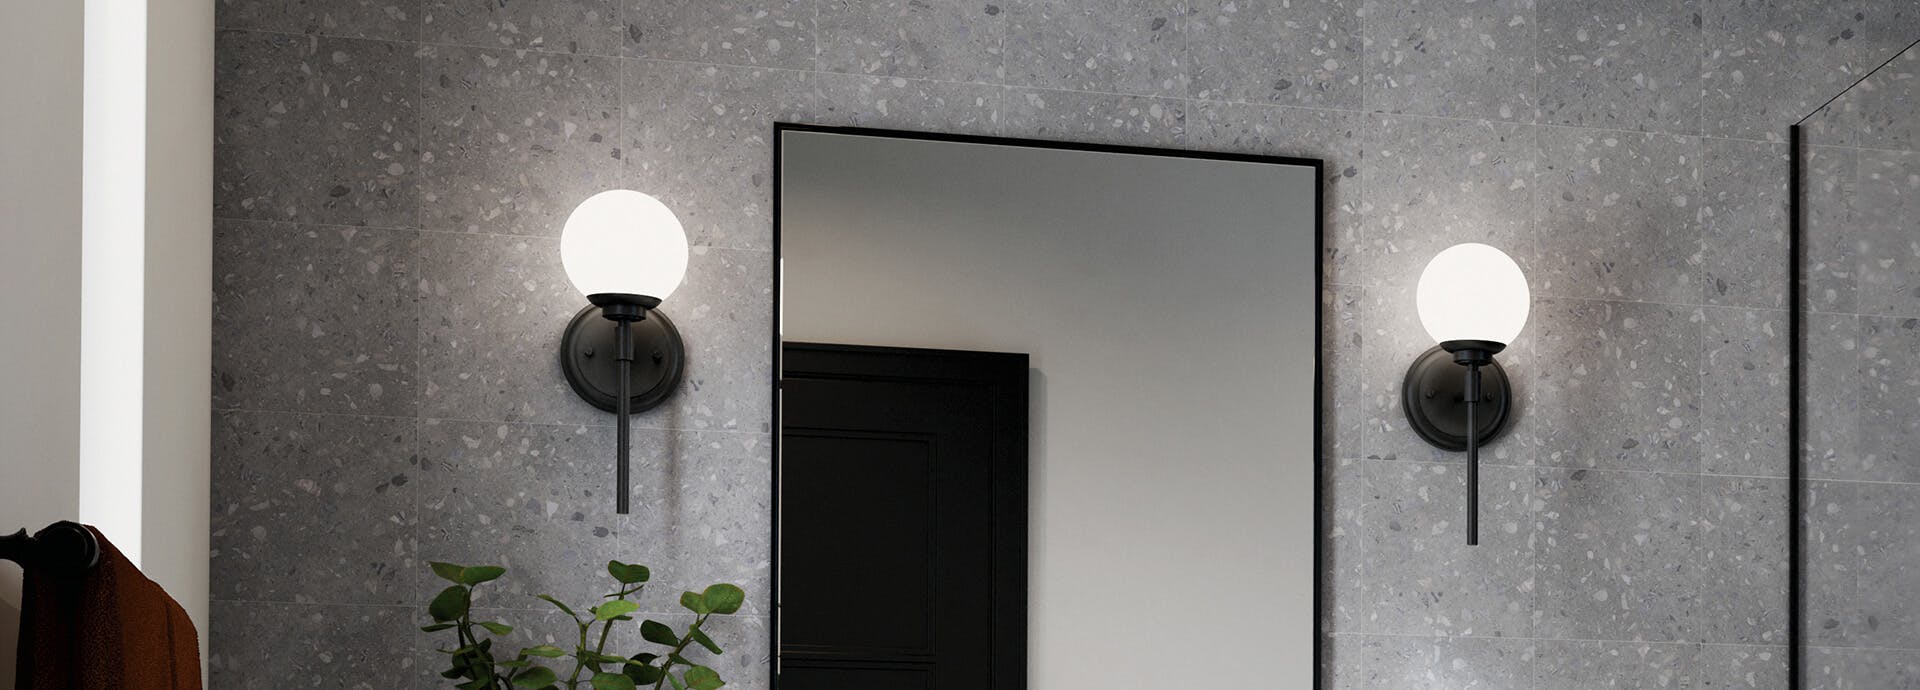 Benno wall sconces on either side of a mirror in a modern bathroom